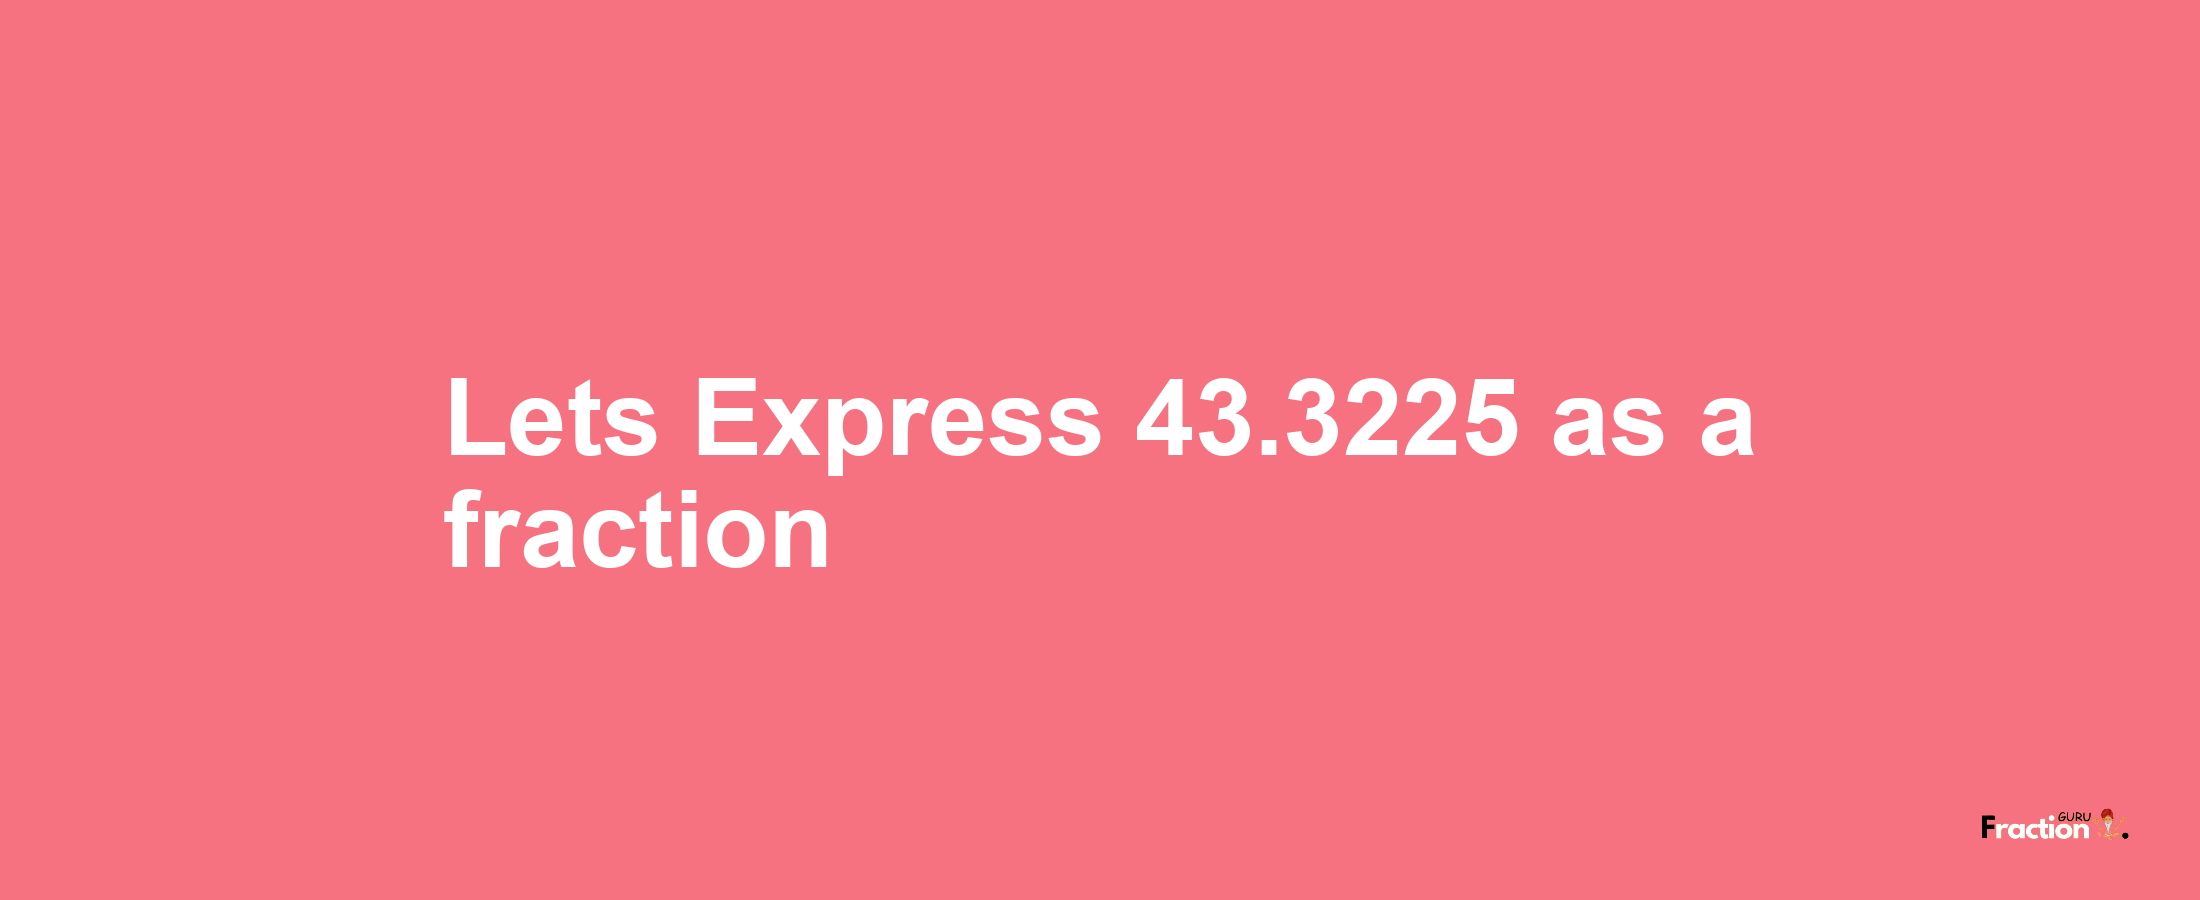 Lets Express 43.3225 as afraction